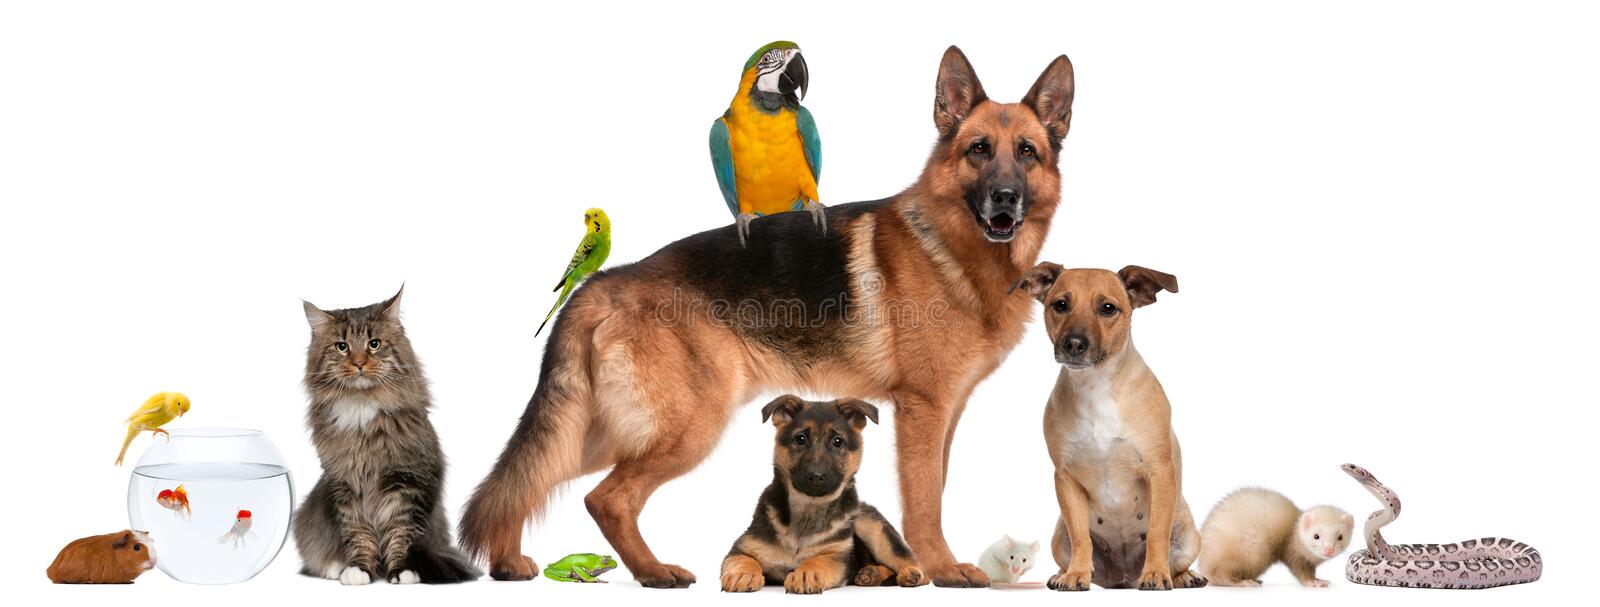 group-pets-sitting-front-white-background-19571764